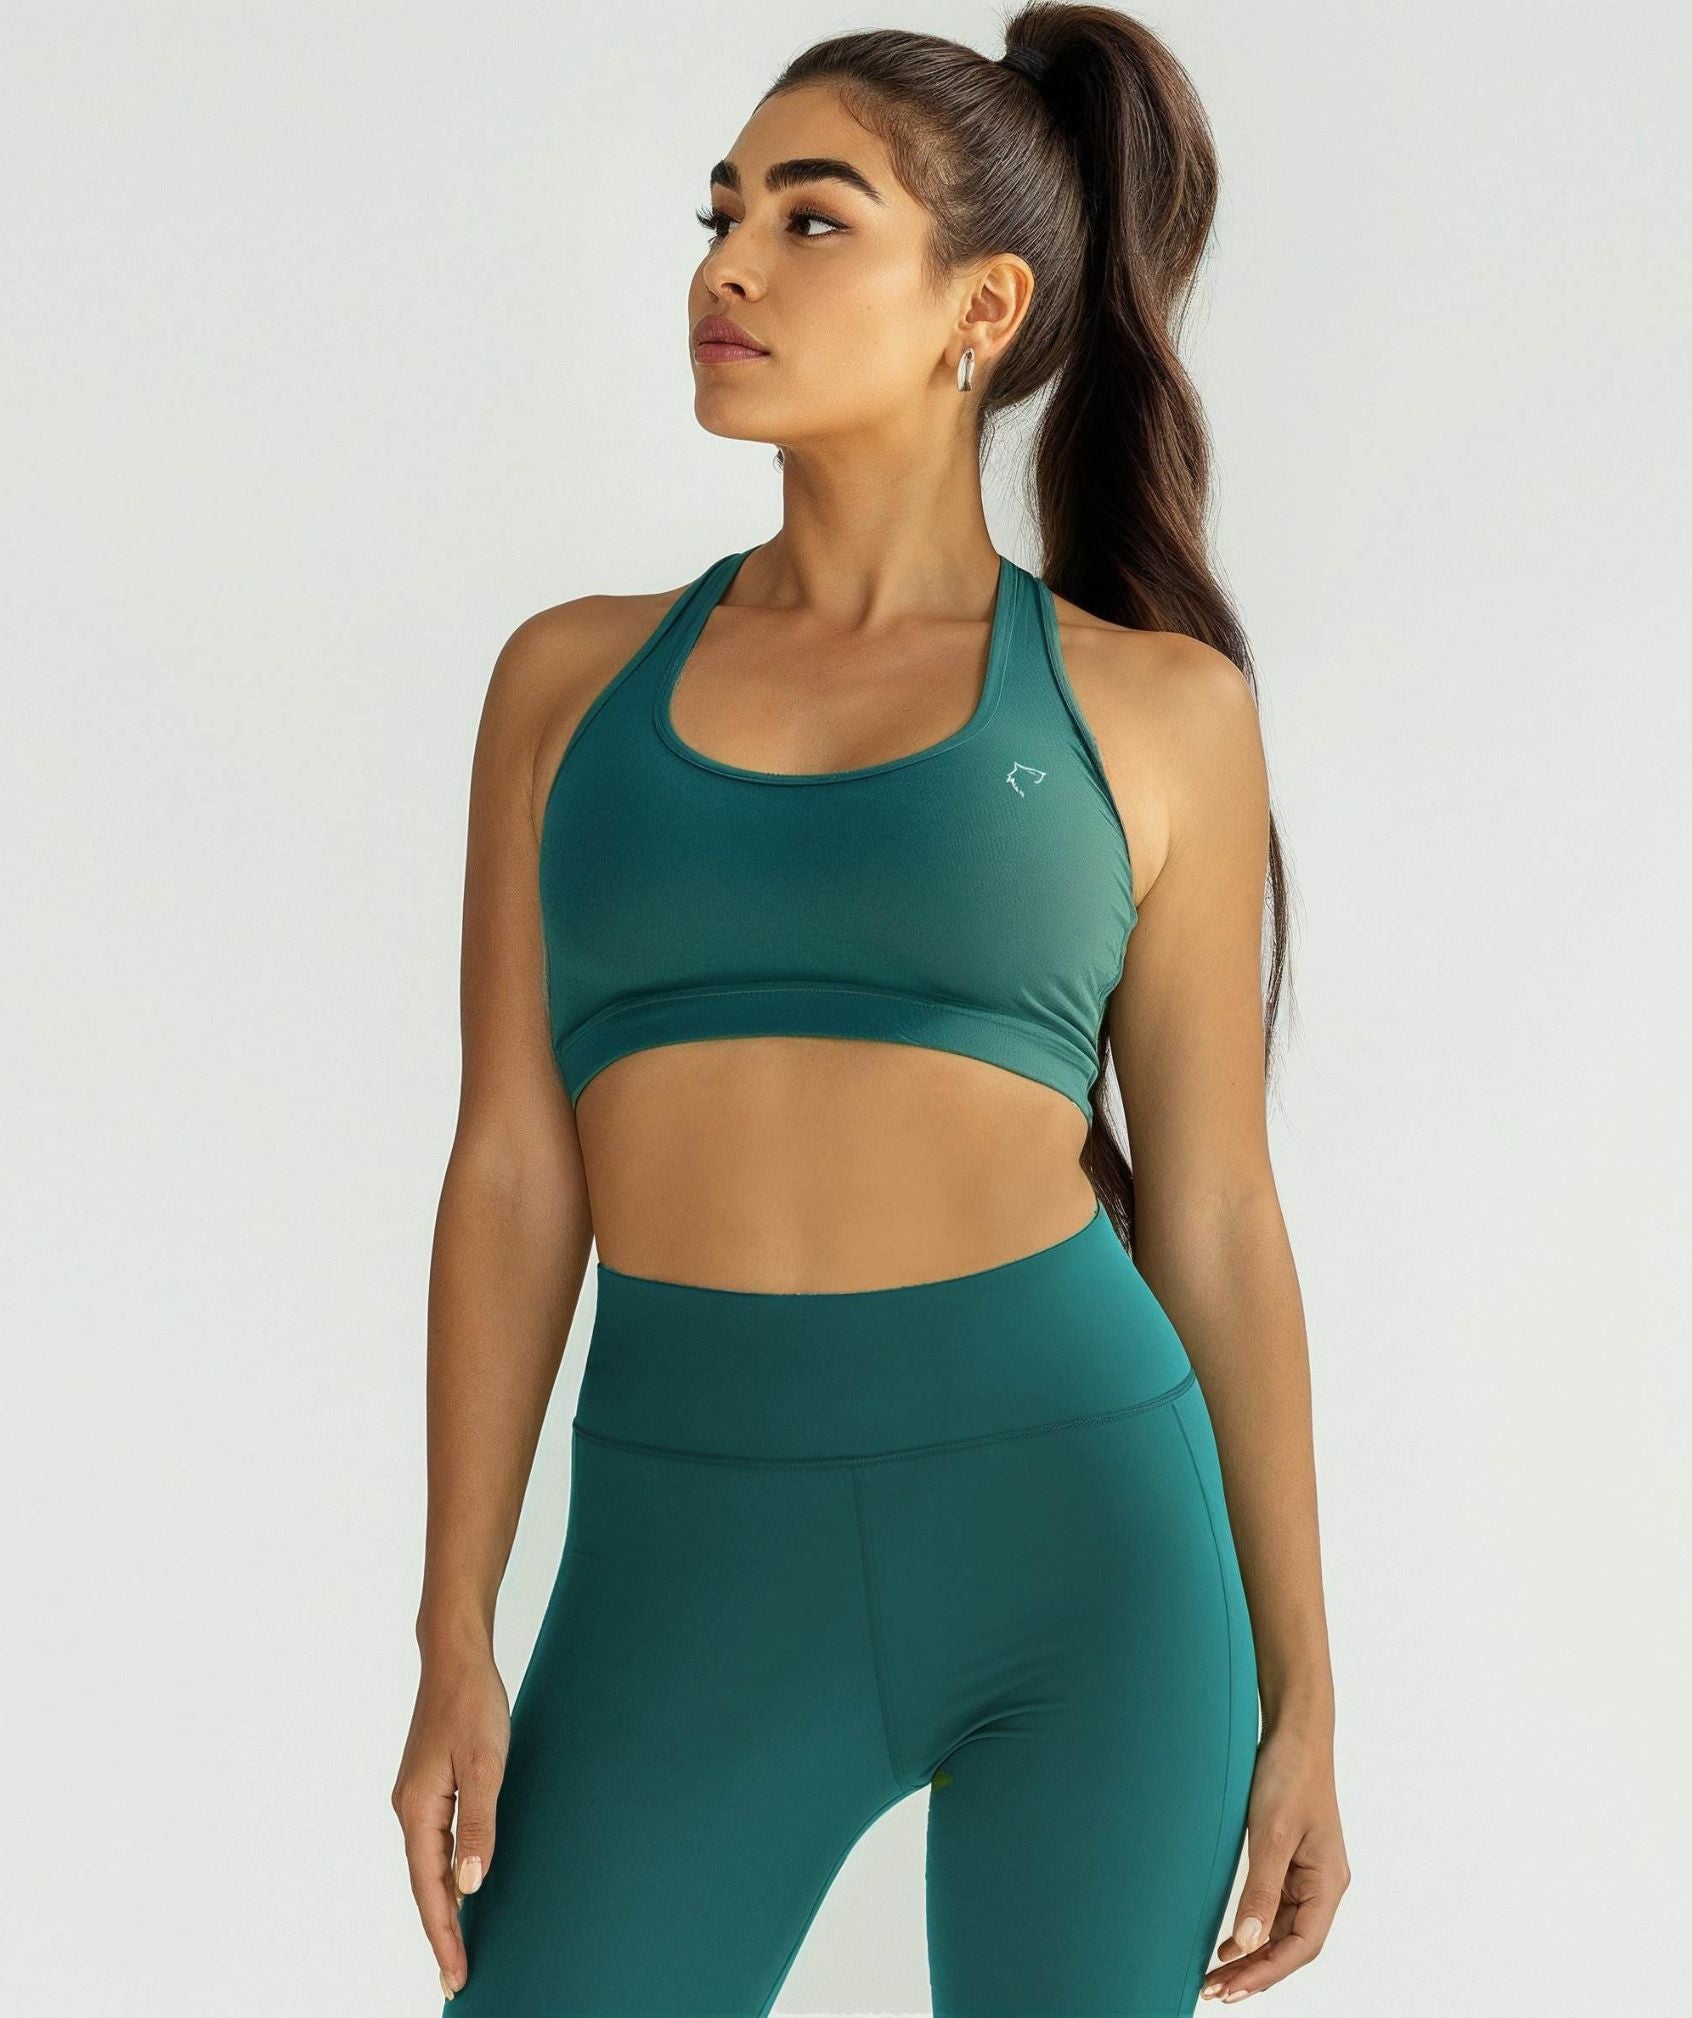 Apex™ green Radiant Bra front view - eco-friendly and supportive sports bra